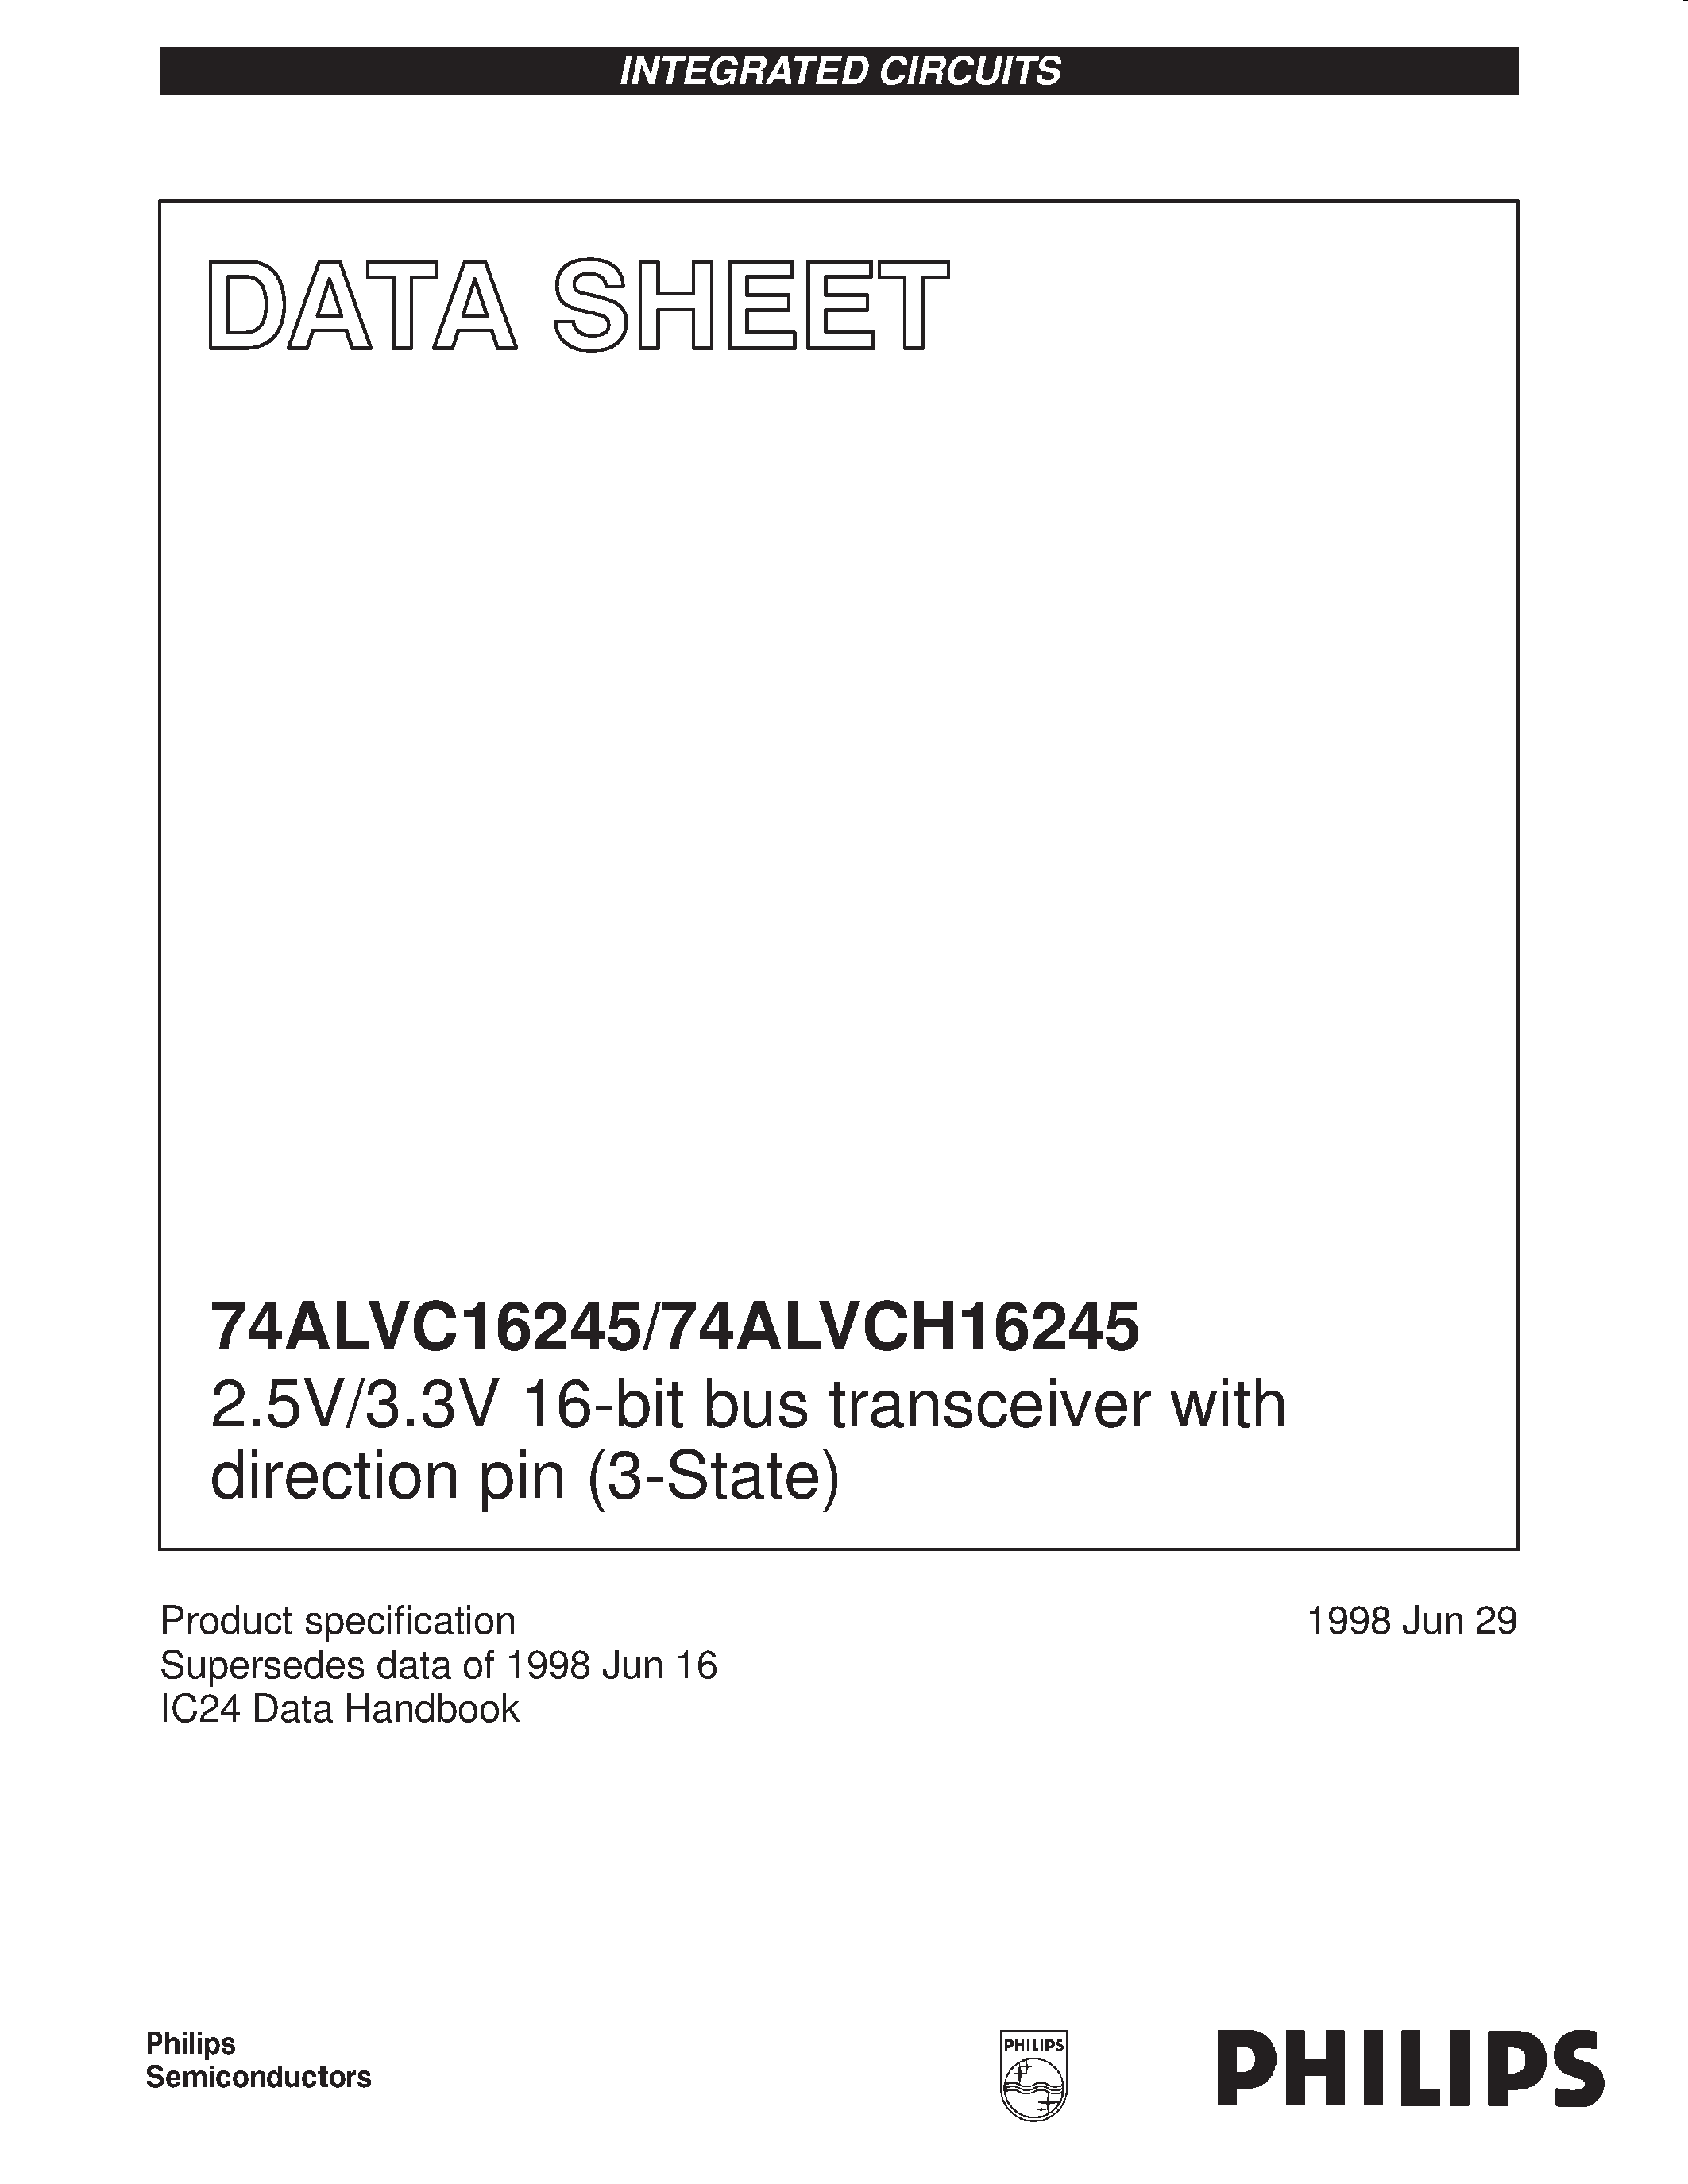 Datasheet 74ALVCH16245DGG - 2.5V/3.3V 16-bit bus transceiver with direction pin 3-State page 1